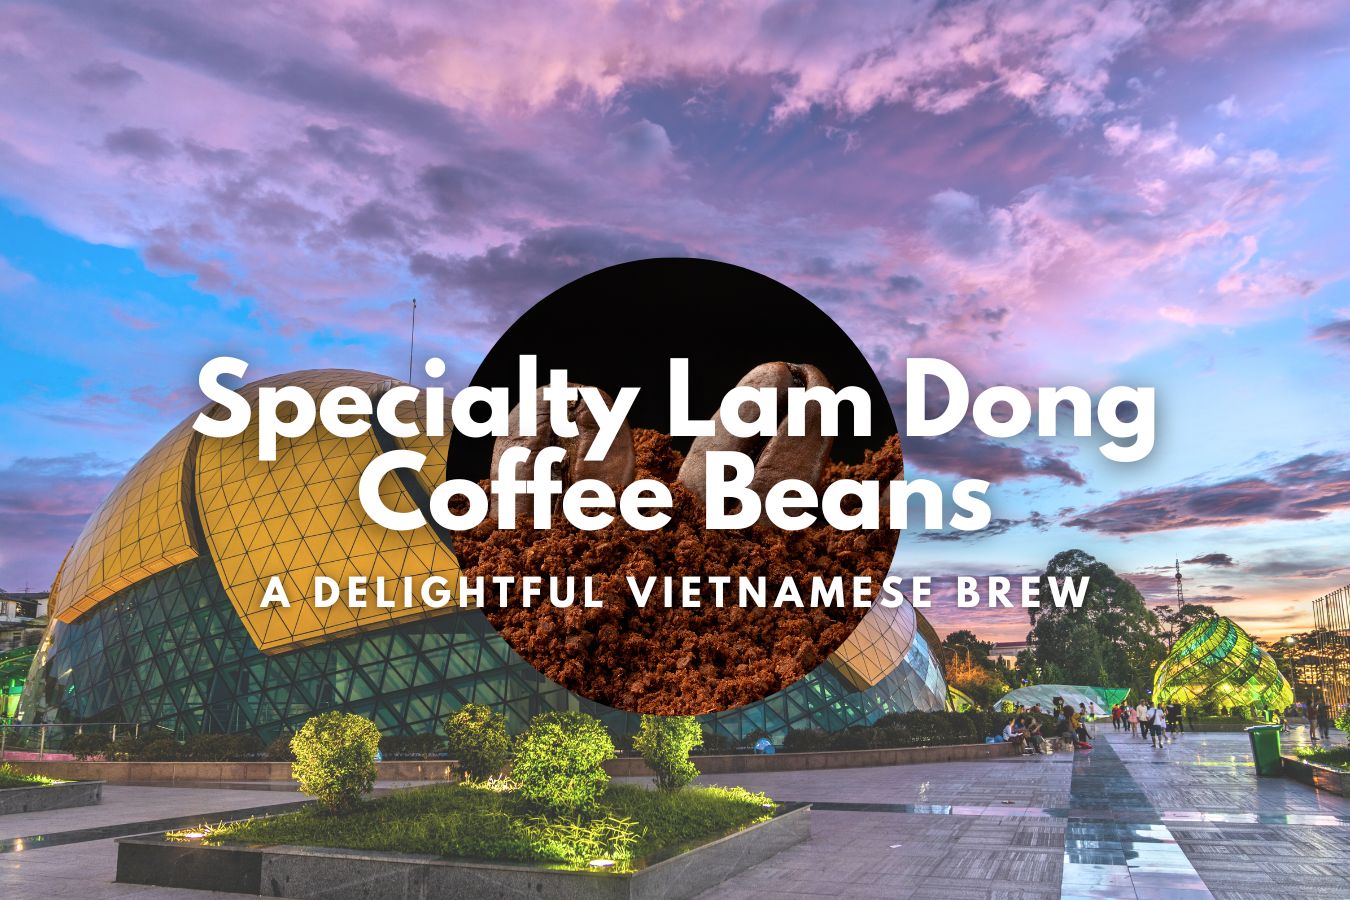 Specialty Lam Dong Coffee Beans A Delightful Vietnamese Brew